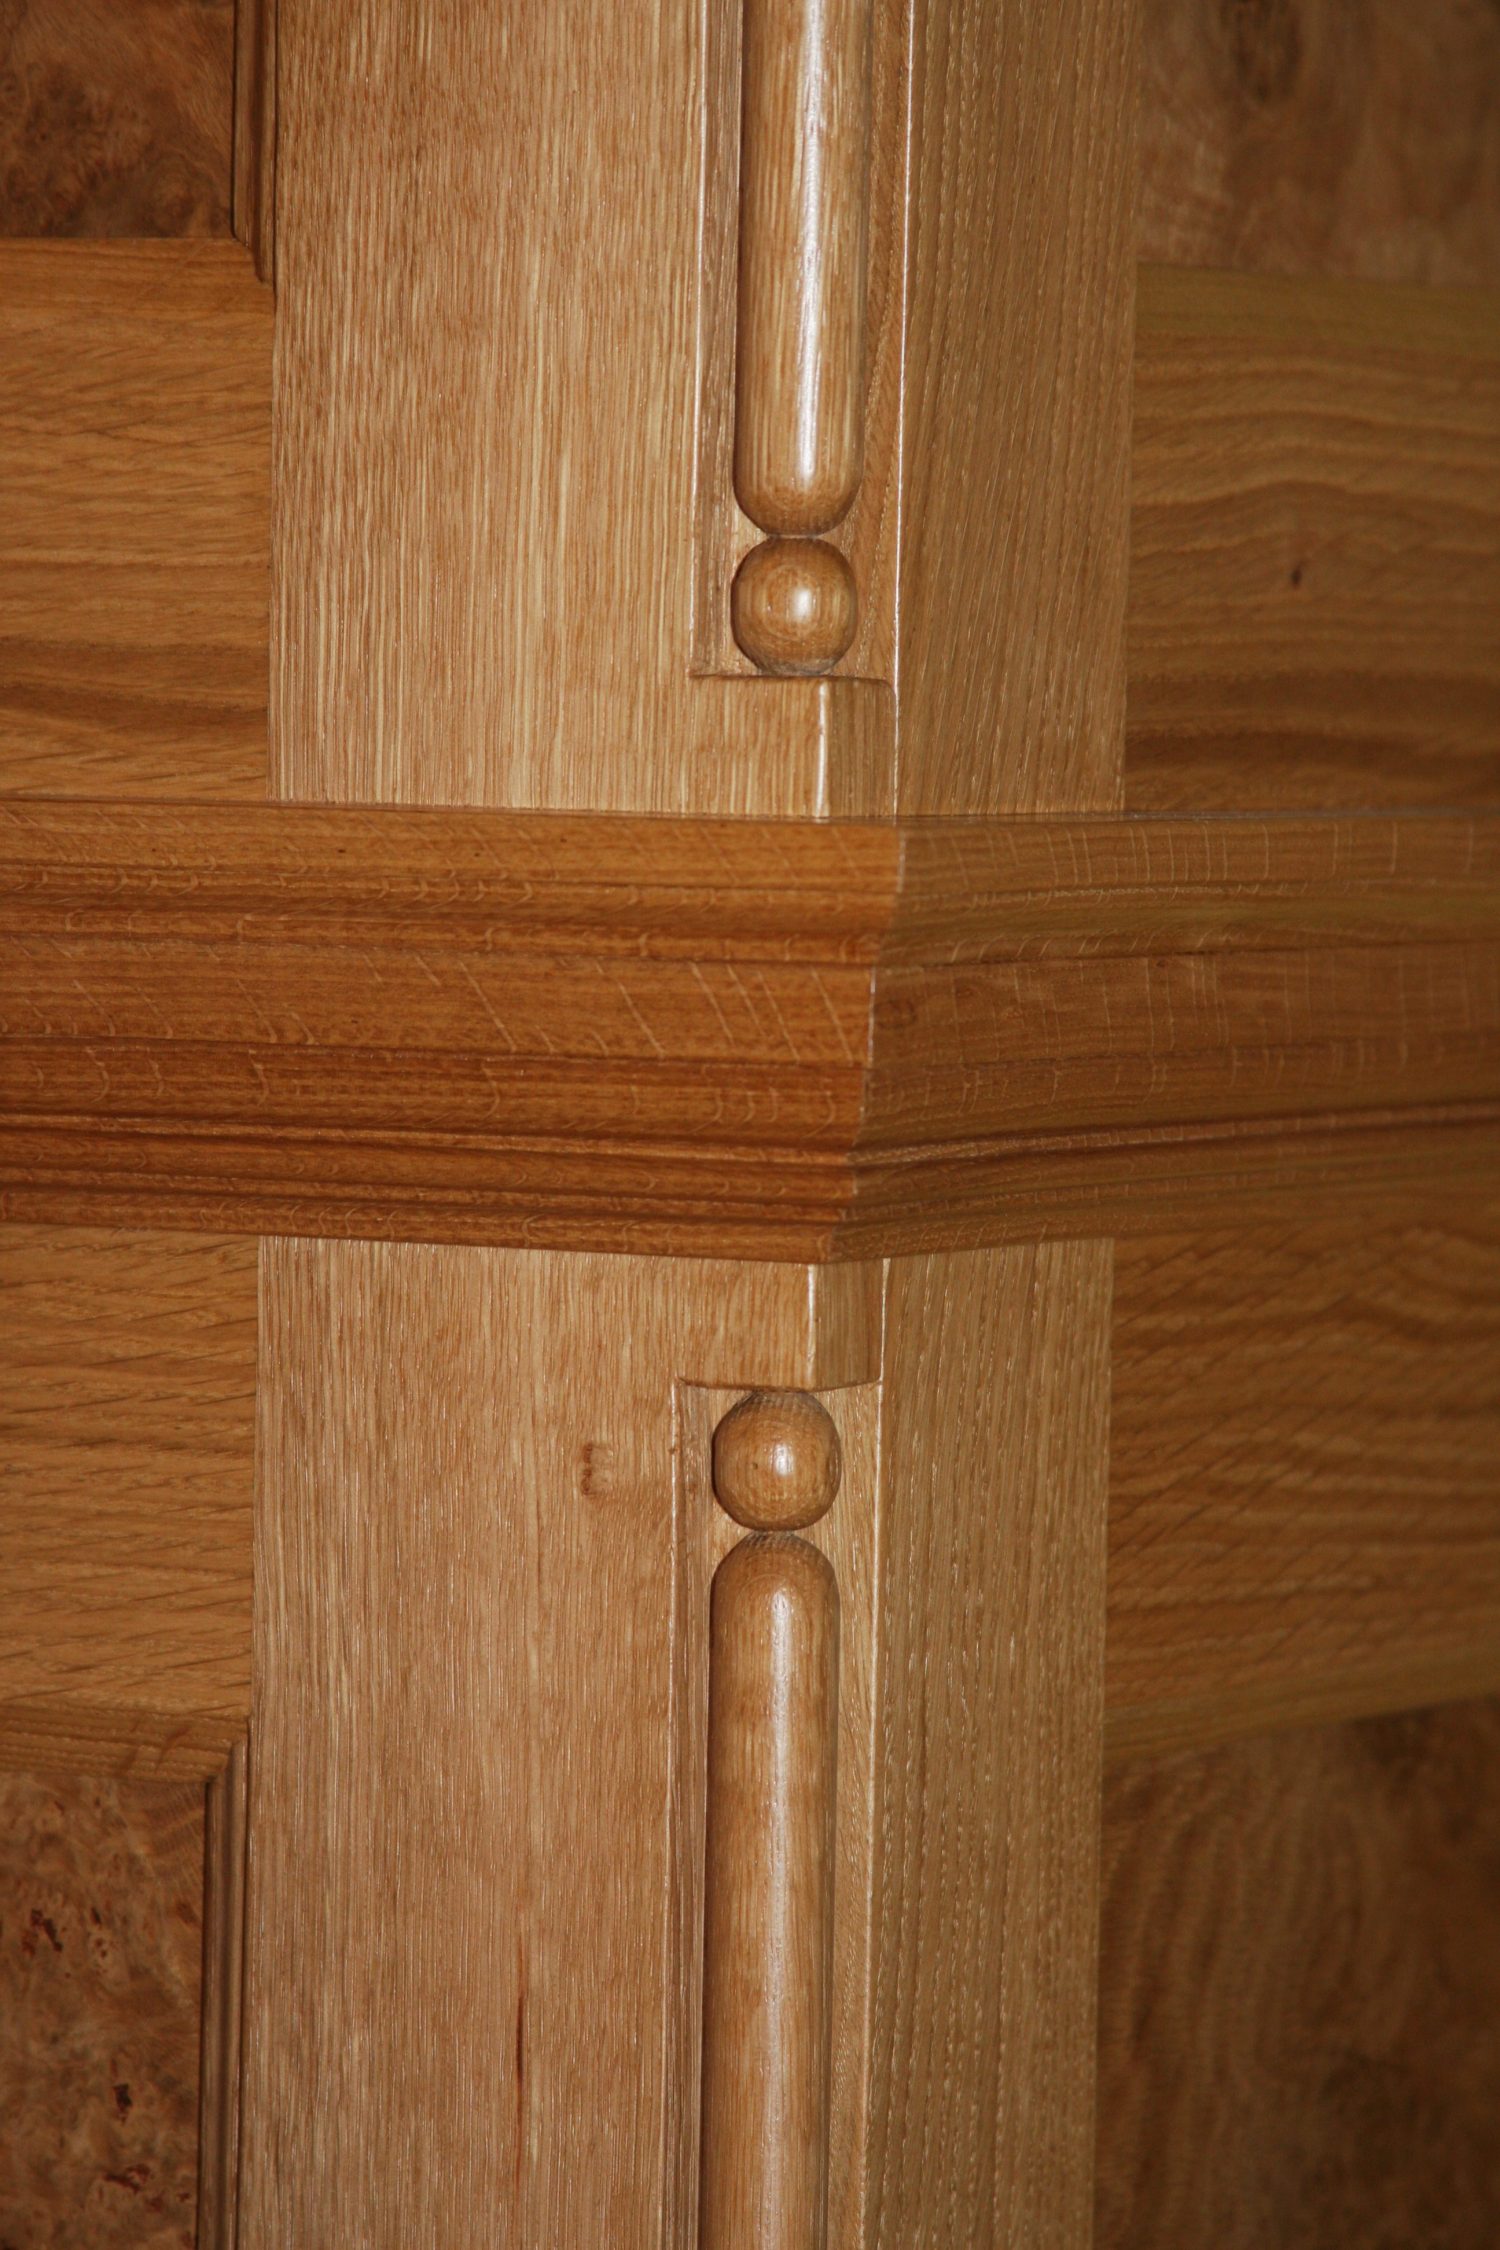 Dado with Stopped Bead Above and Below